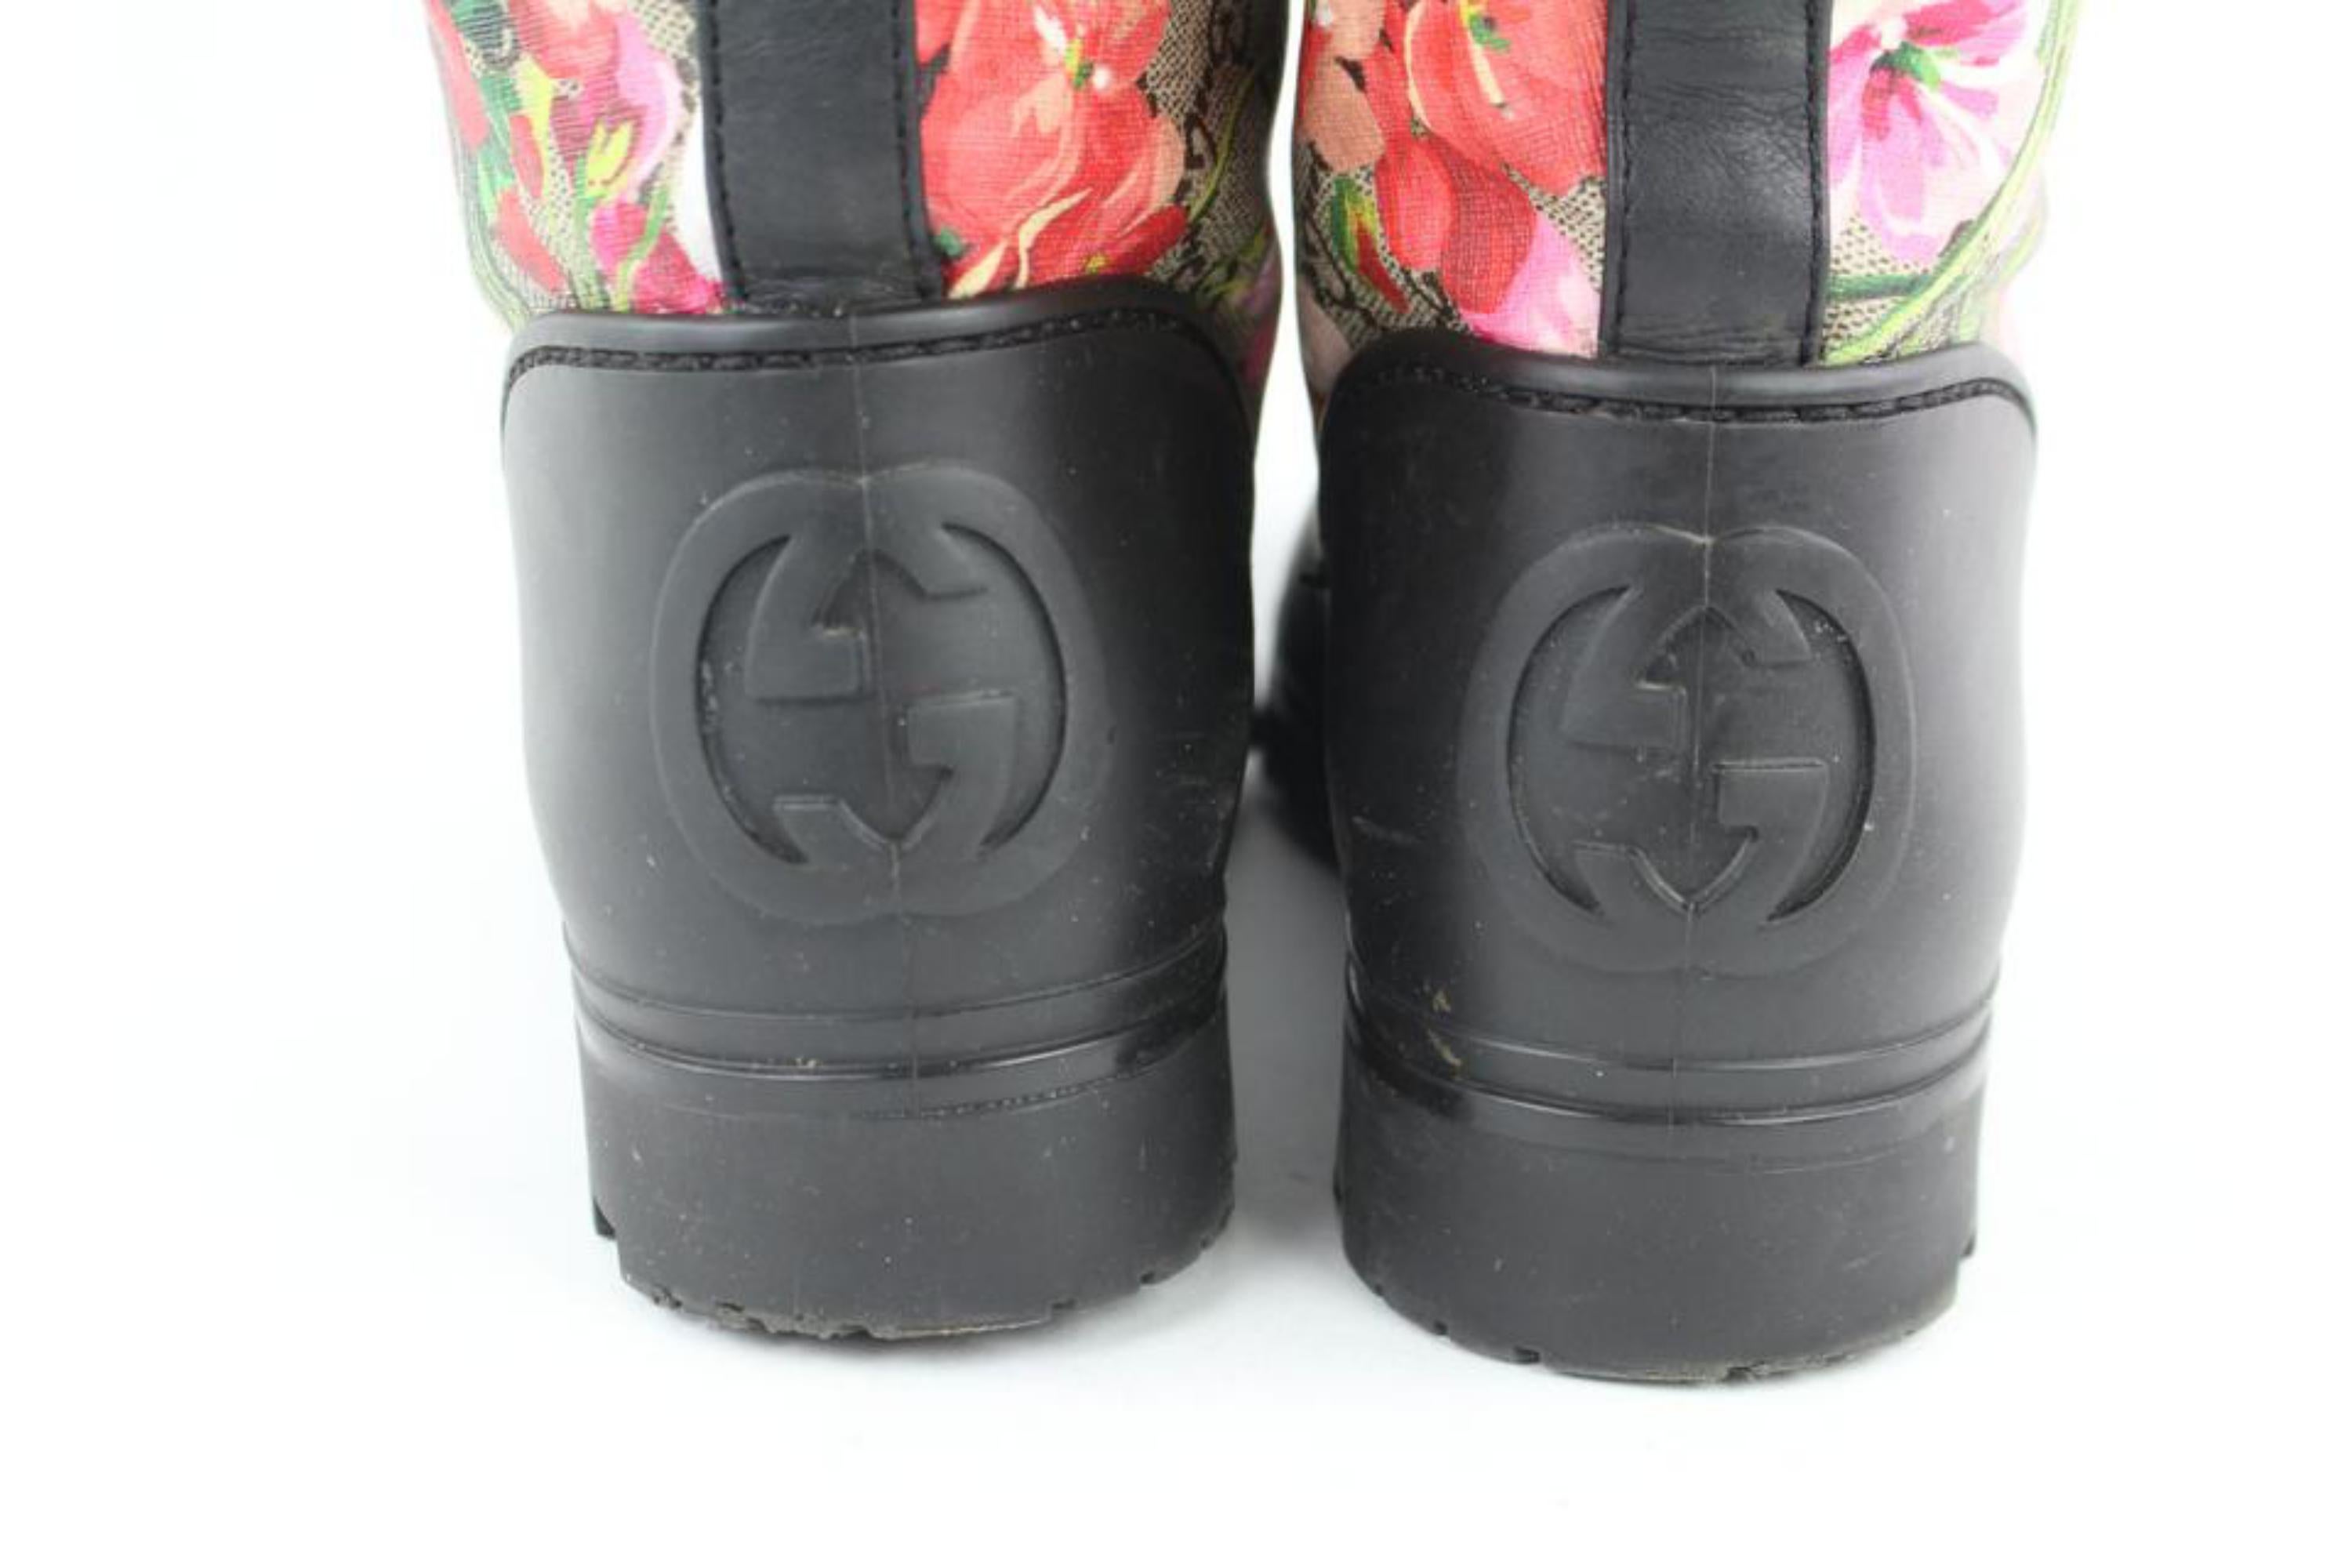 Gucci Black Limited Supreme Prato Gg Blooms Rain Boots/Booties 24684511 In Excellent Condition For Sale In Forest Hills, NY